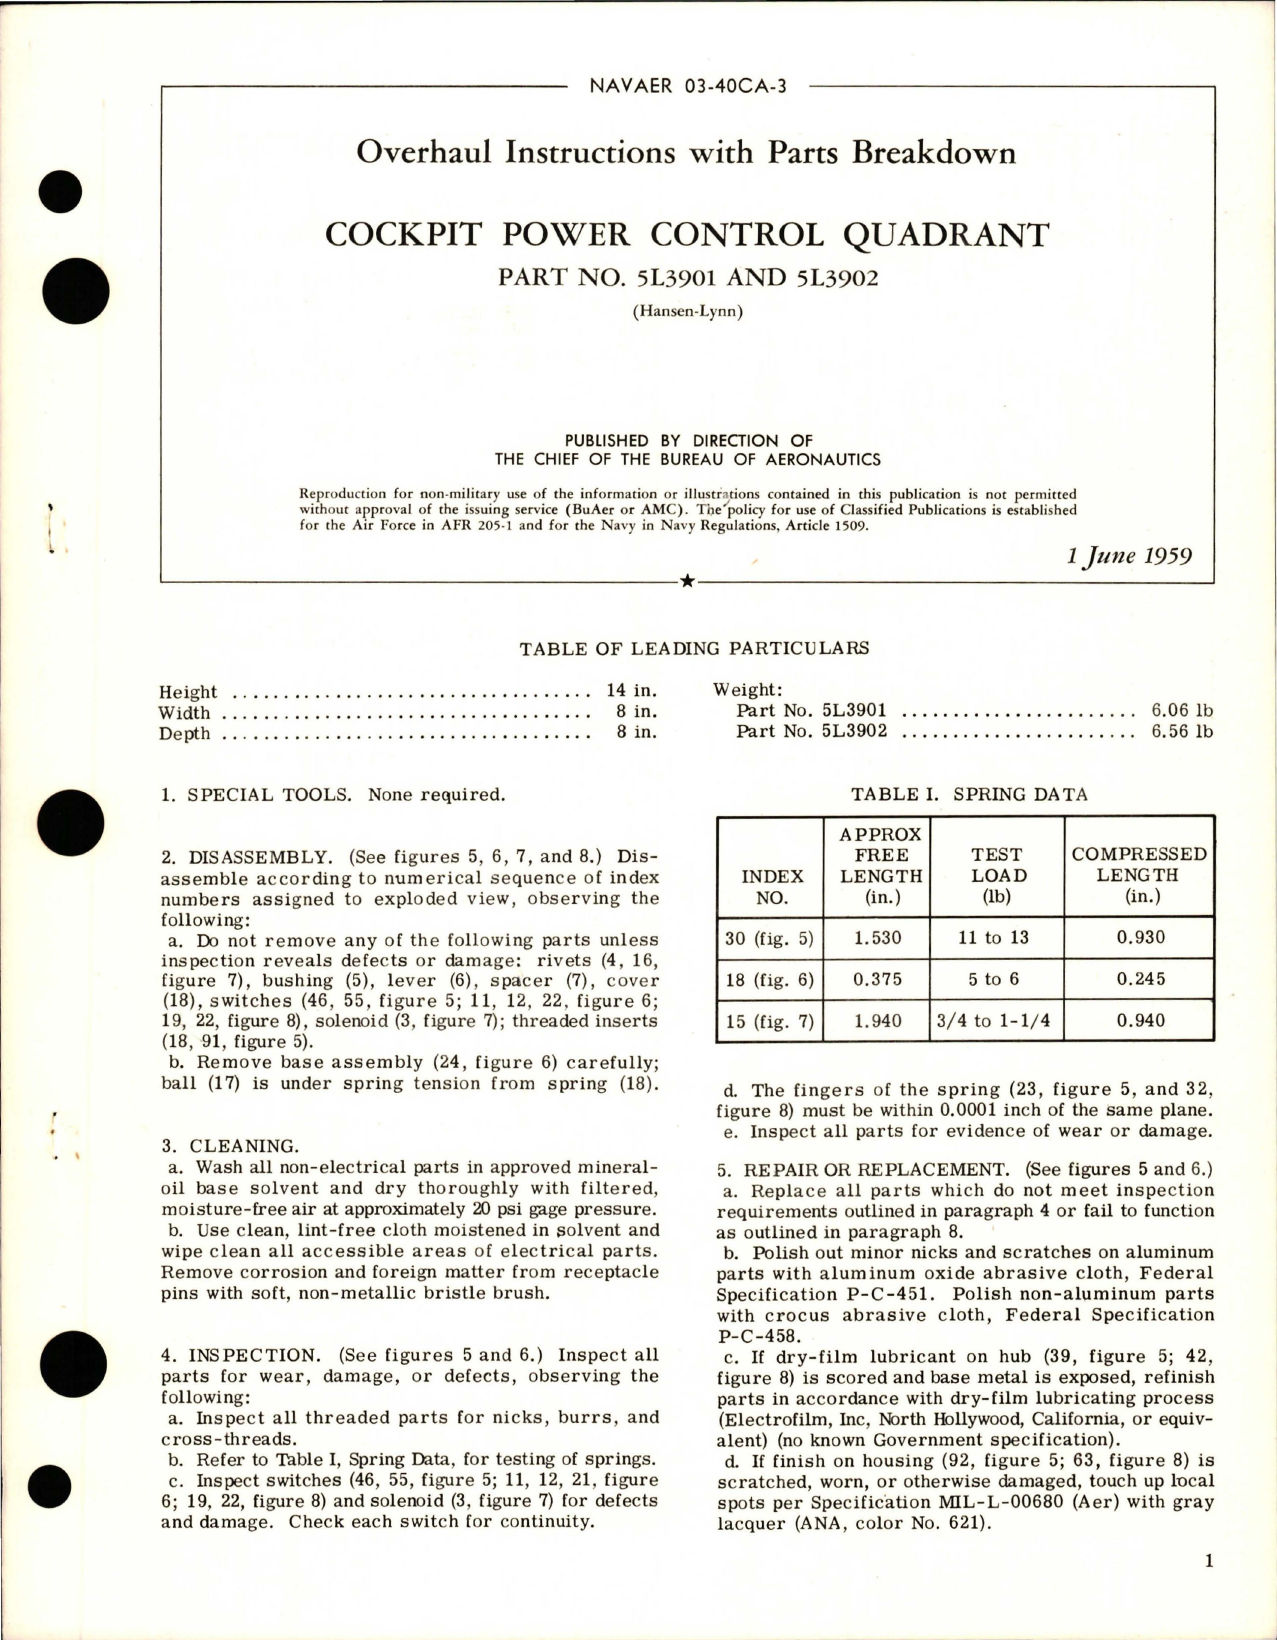 Sample page 1 from AirCorps Library document: Overhaul Instructions with Parts Breakdown for Cockpit Power Control Quadrant - Parts 5L3901 and 5L3902